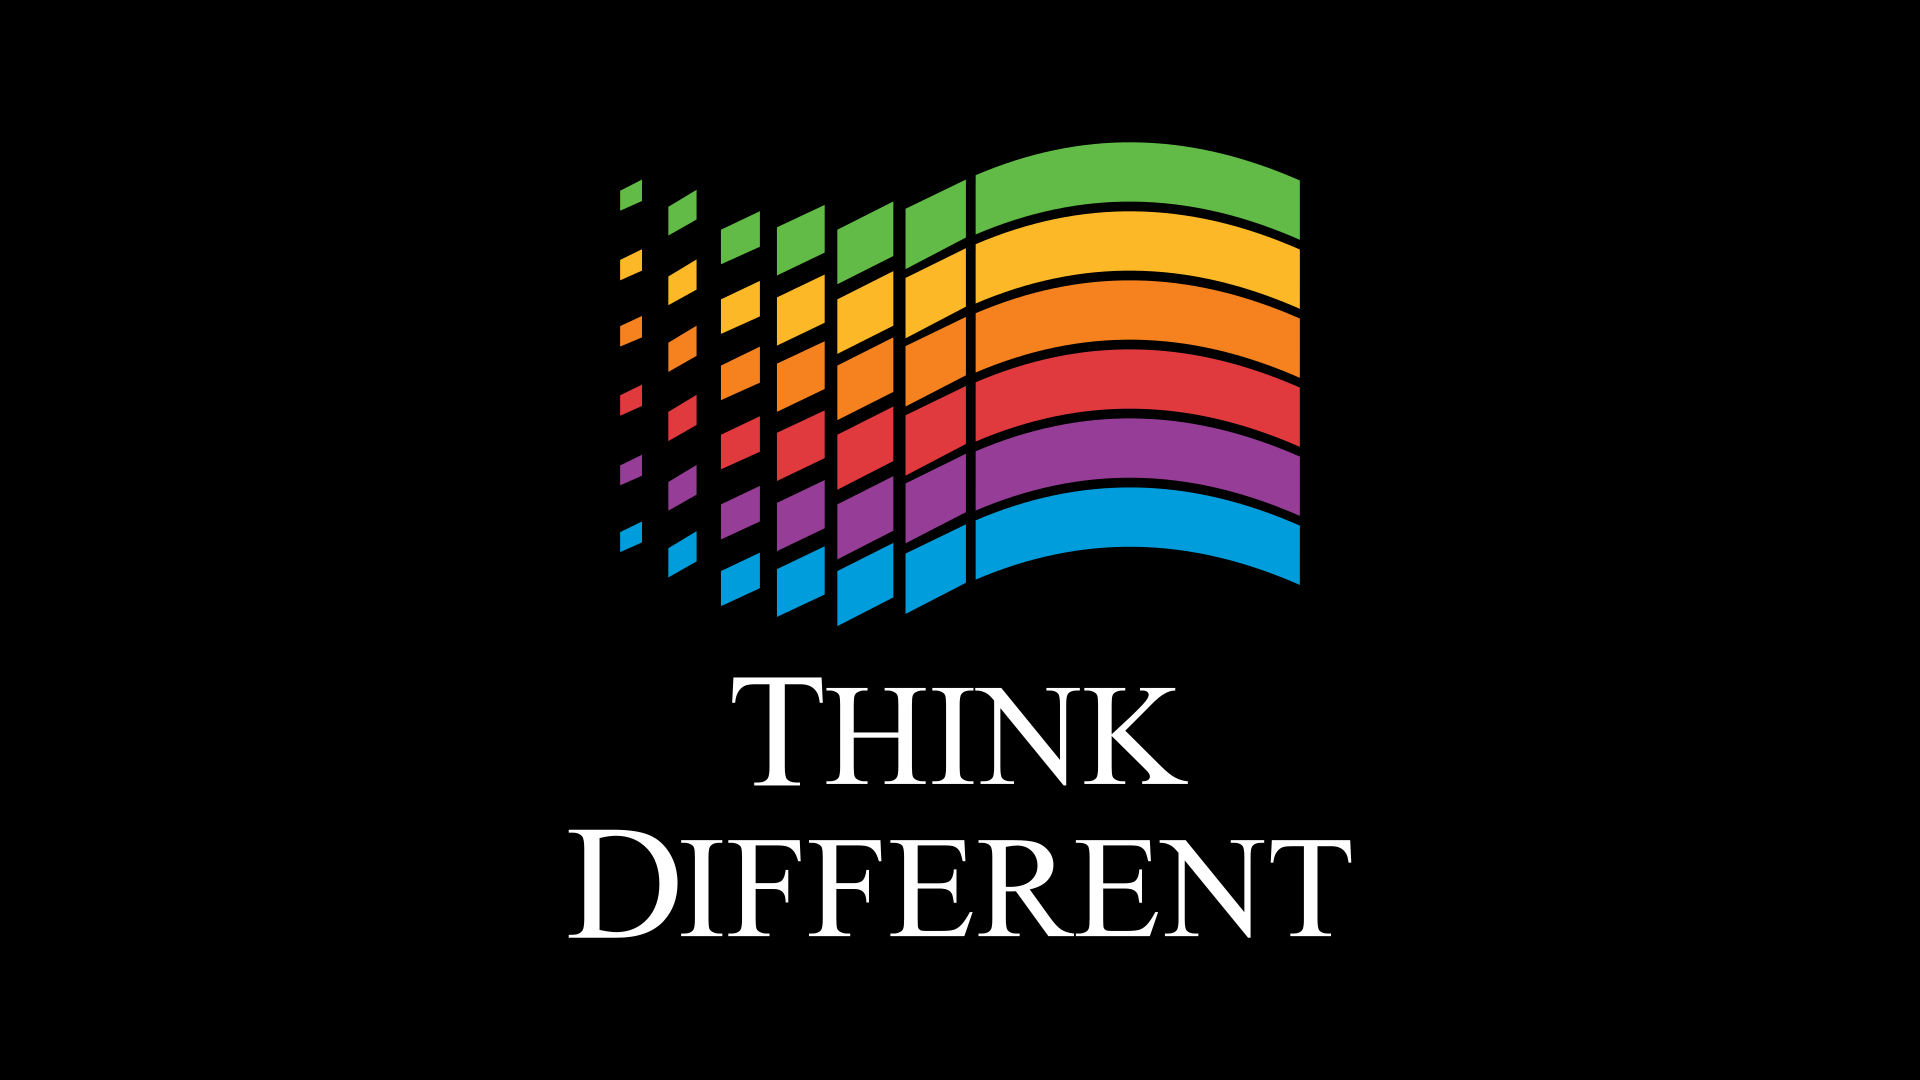 Windows 3.1 Logo - Think different, in the style of Microsoft Windows 3.1's logo